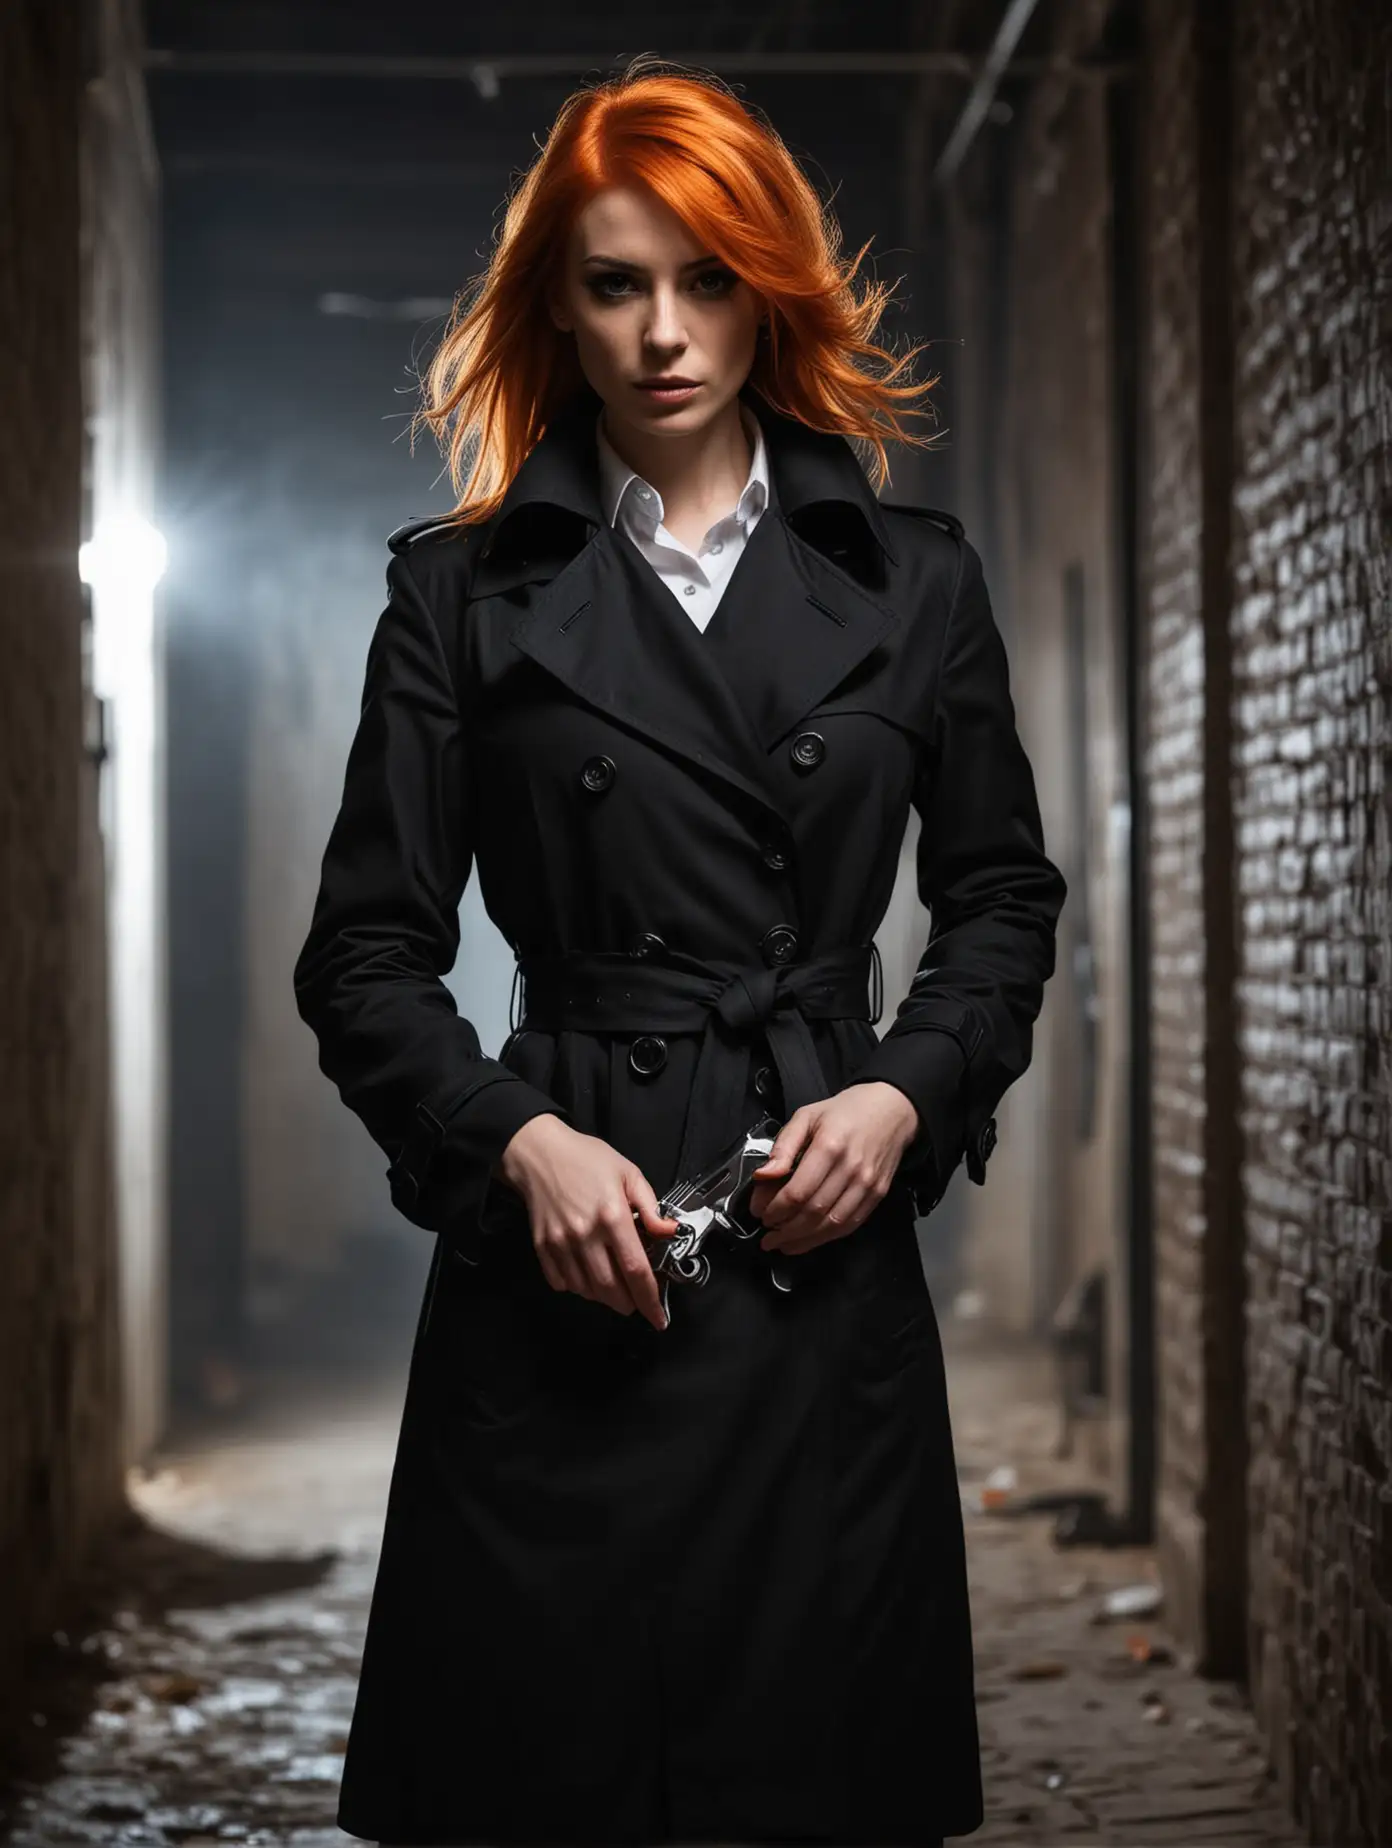 Stealthy Secret Agent Woman in Black Trench Coat with Orange Hair Holding Handgun